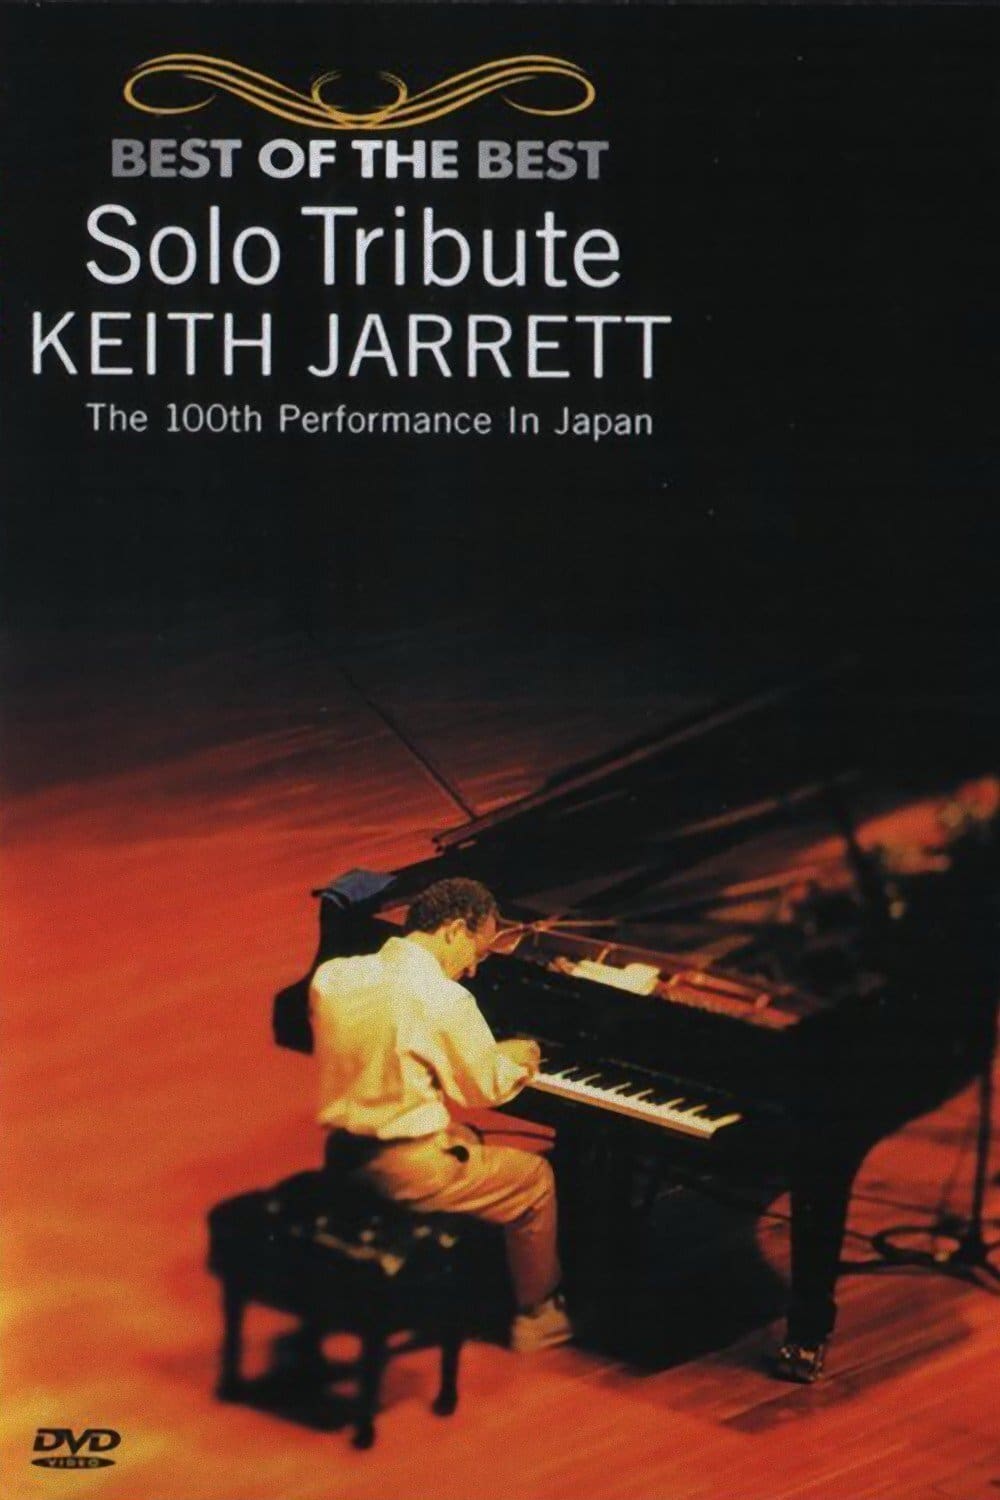 Solo Tribute: Keith Jarrett – The 100th Performance in Japan